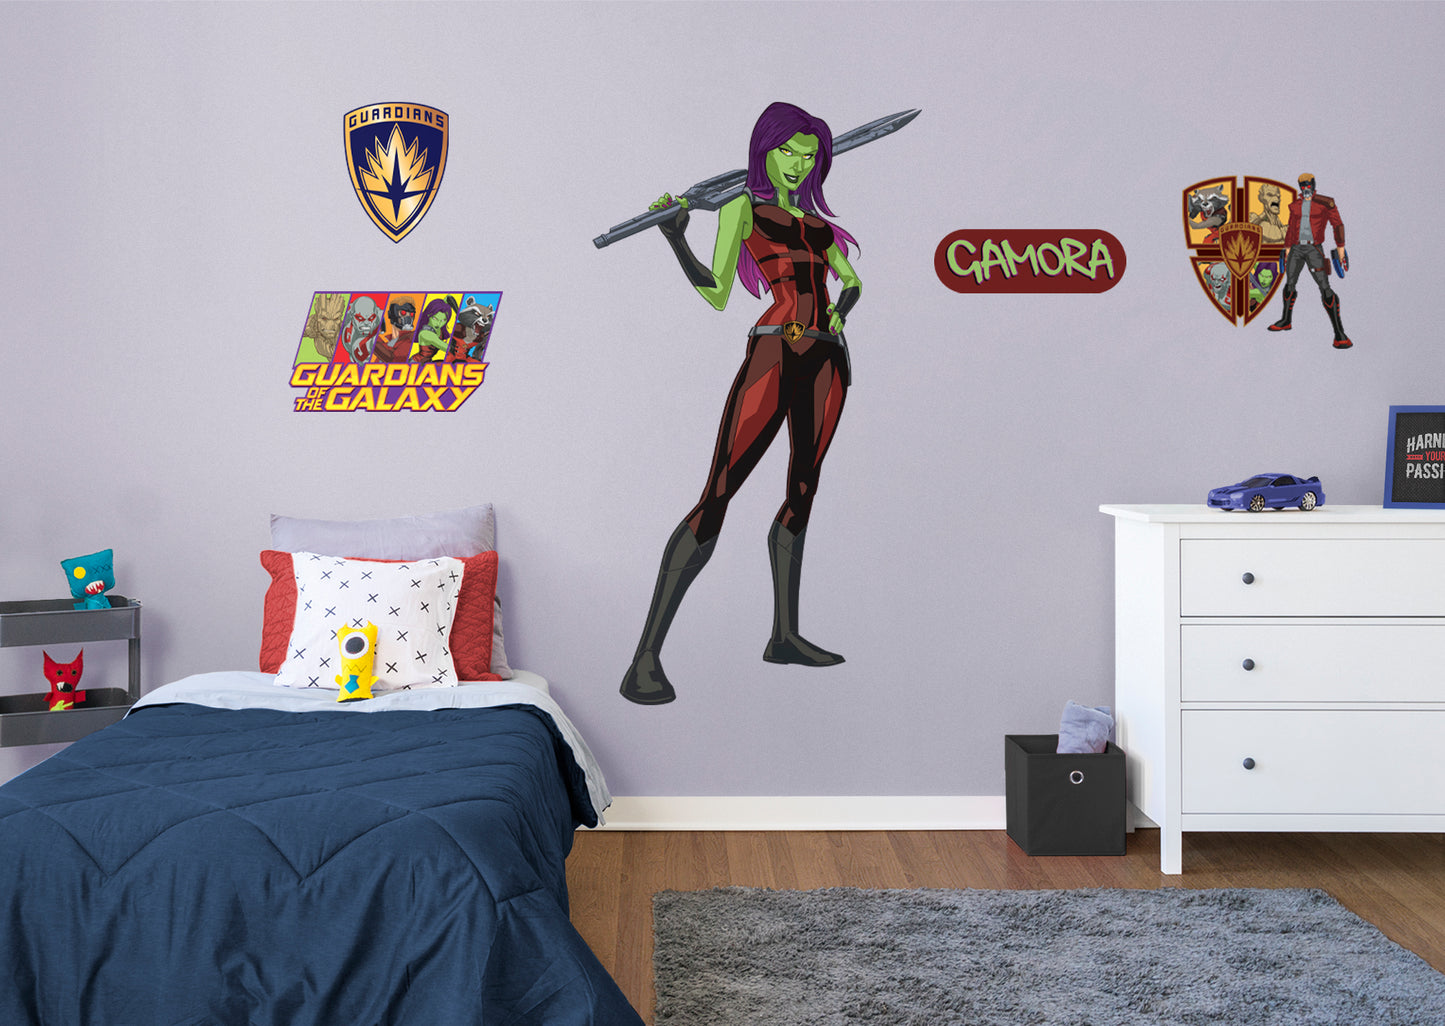 Guardians of the Galaxy Gamora RealBig        - Officially Licensed Marvel Removable Wall   Adhesive Decal